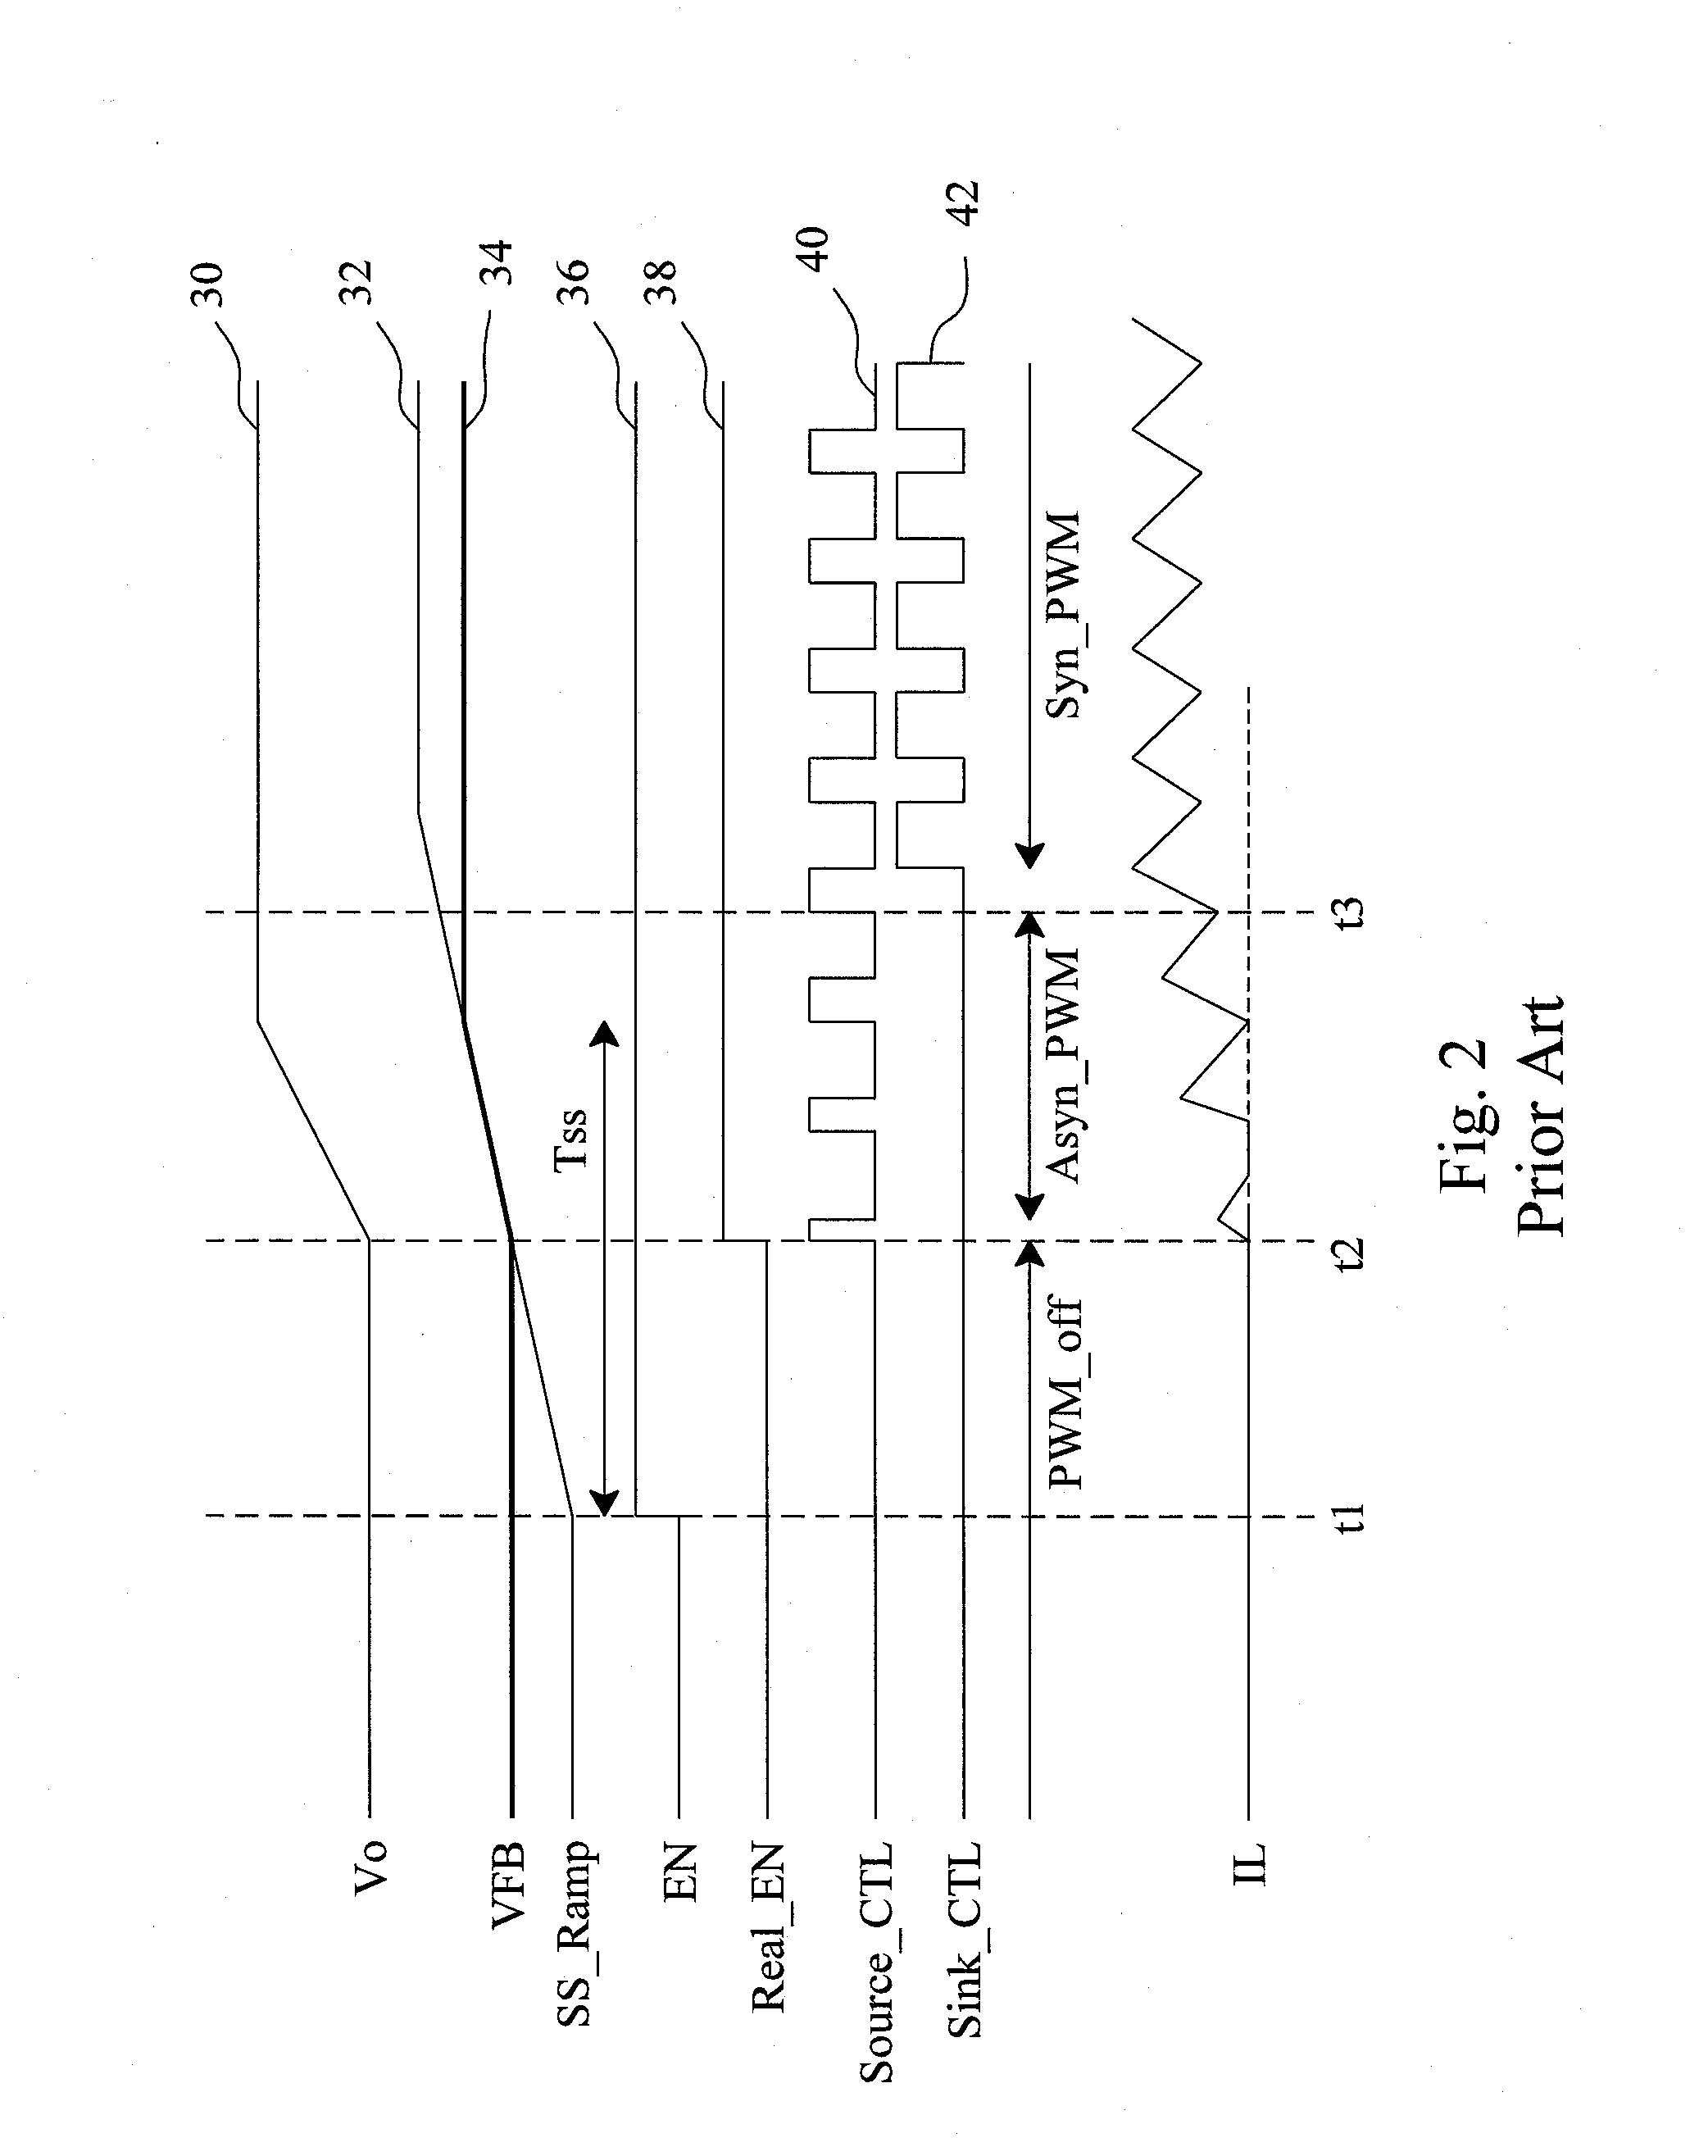 Soft-start circuit and method for a switching regulator